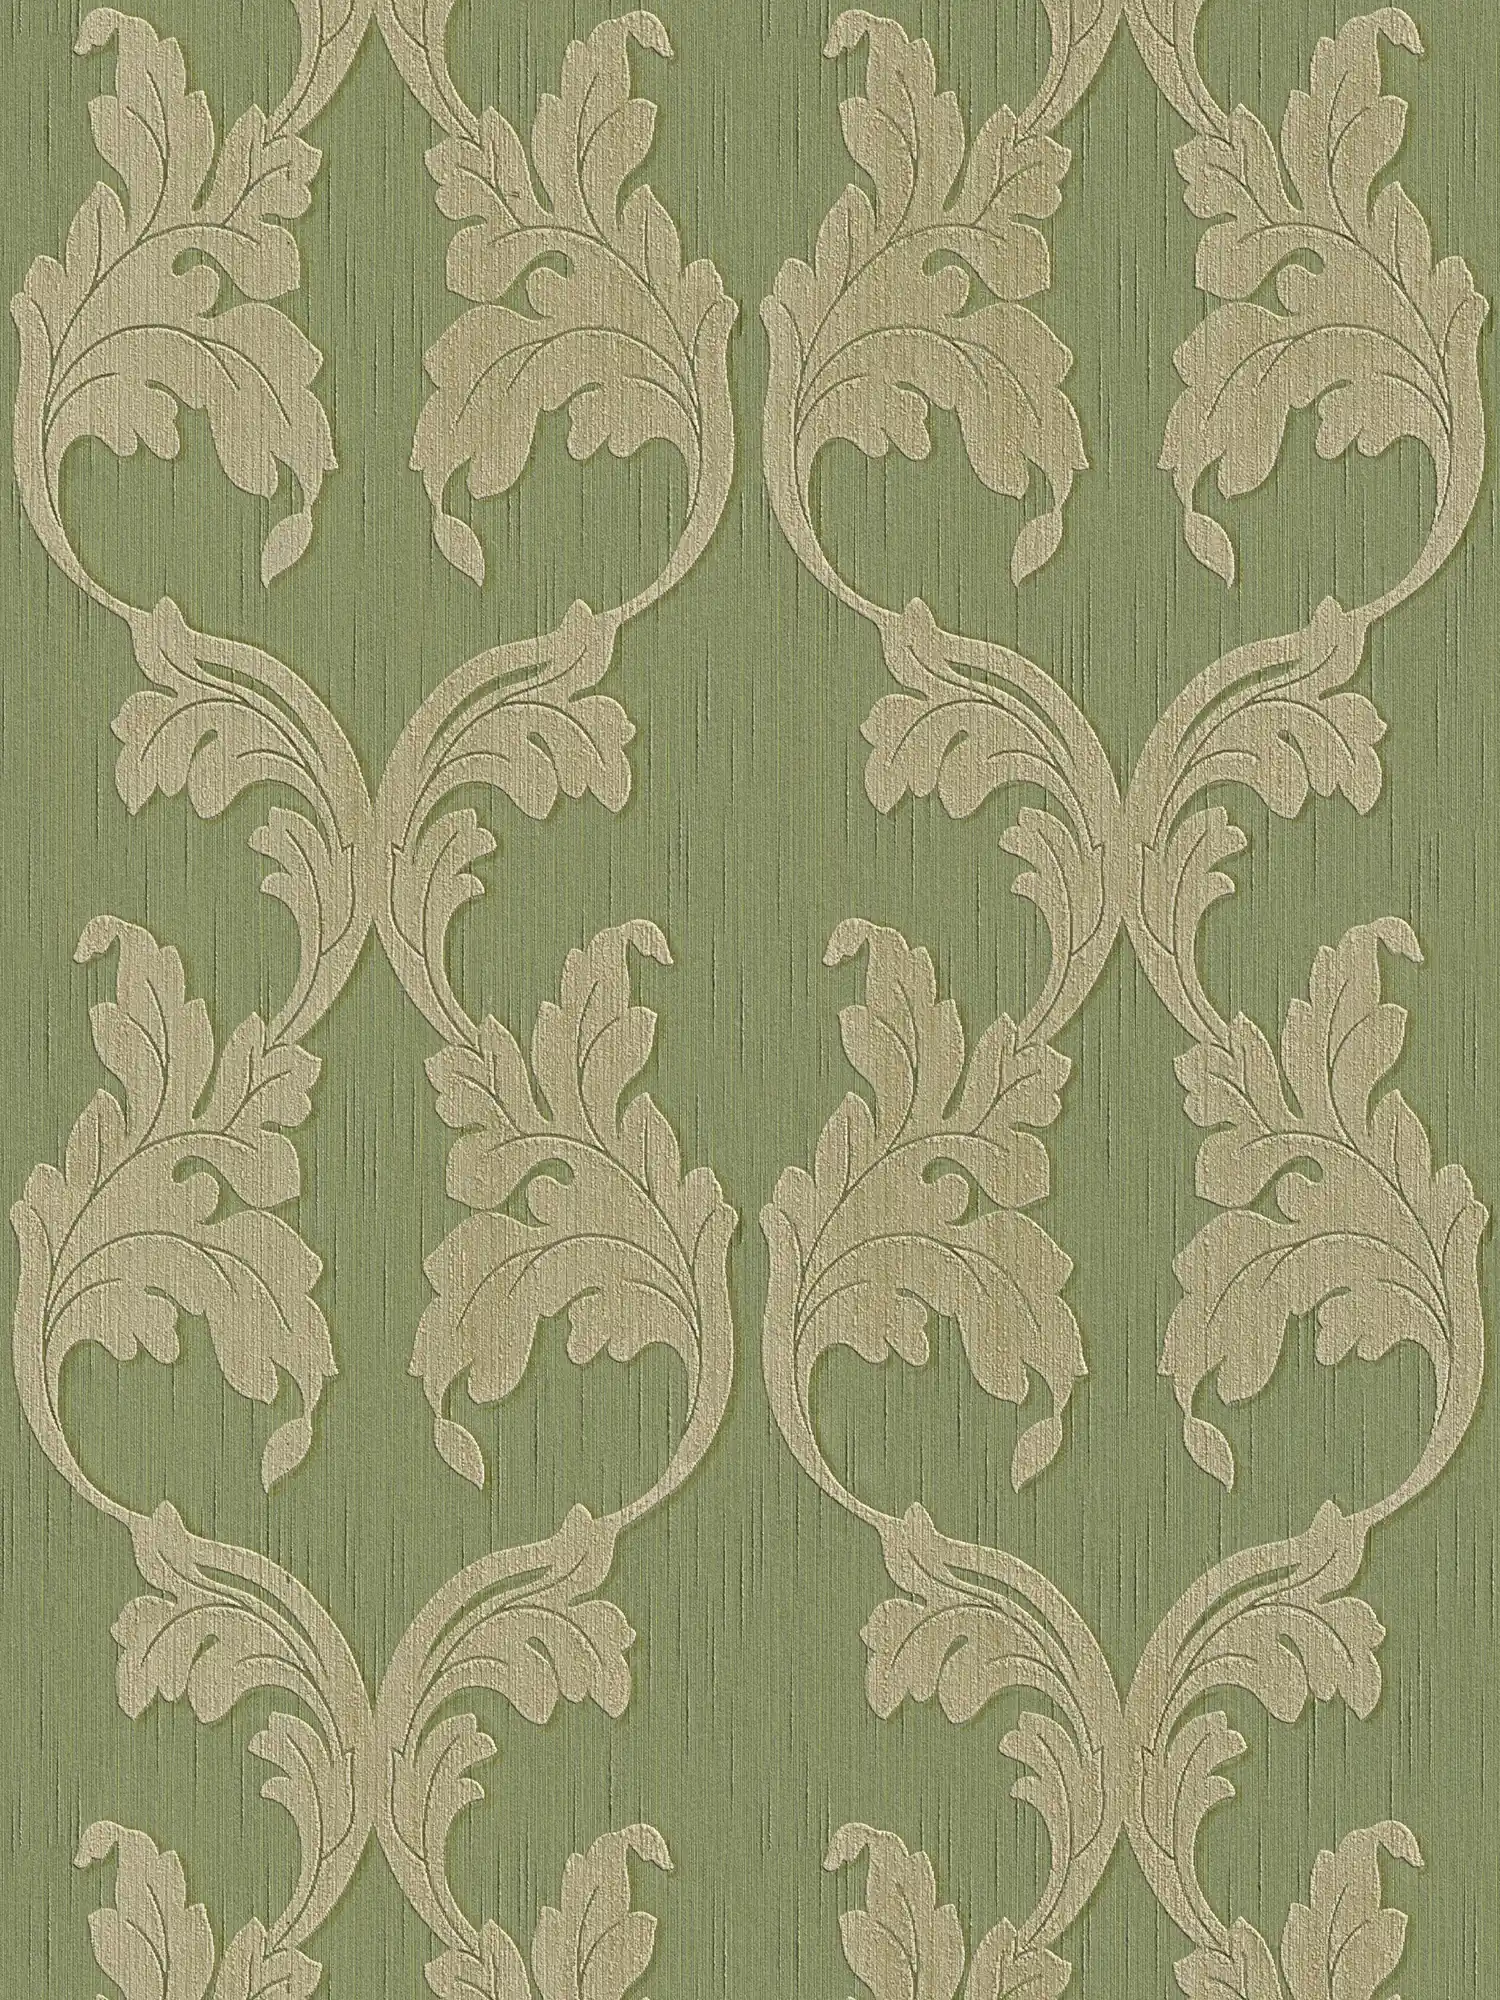 Wallpaper with ornamental vines & textured pattern - green
